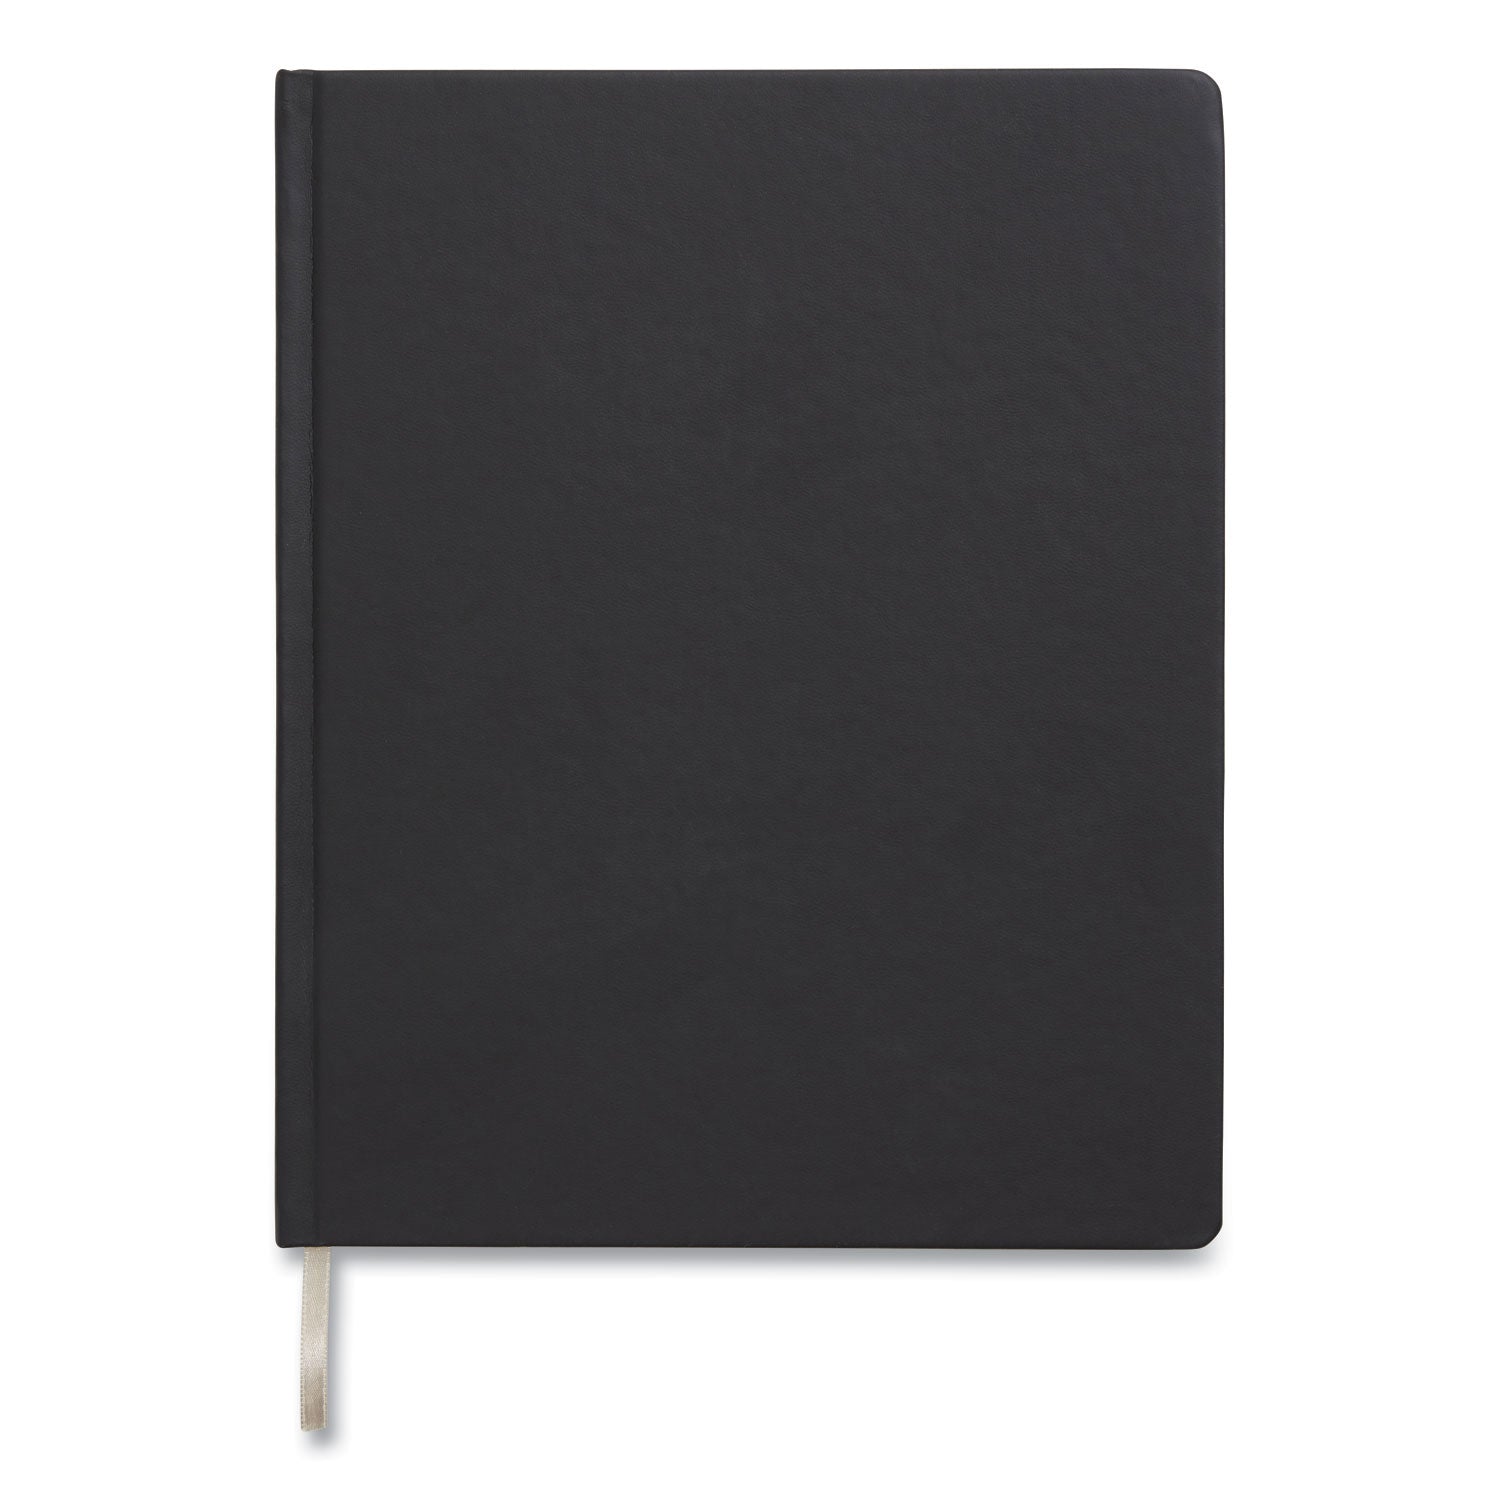 hardcover-business-journal-1-subject-narrow-rule-black-cover-96-10-x-8-sheets_tud24377295 - 1